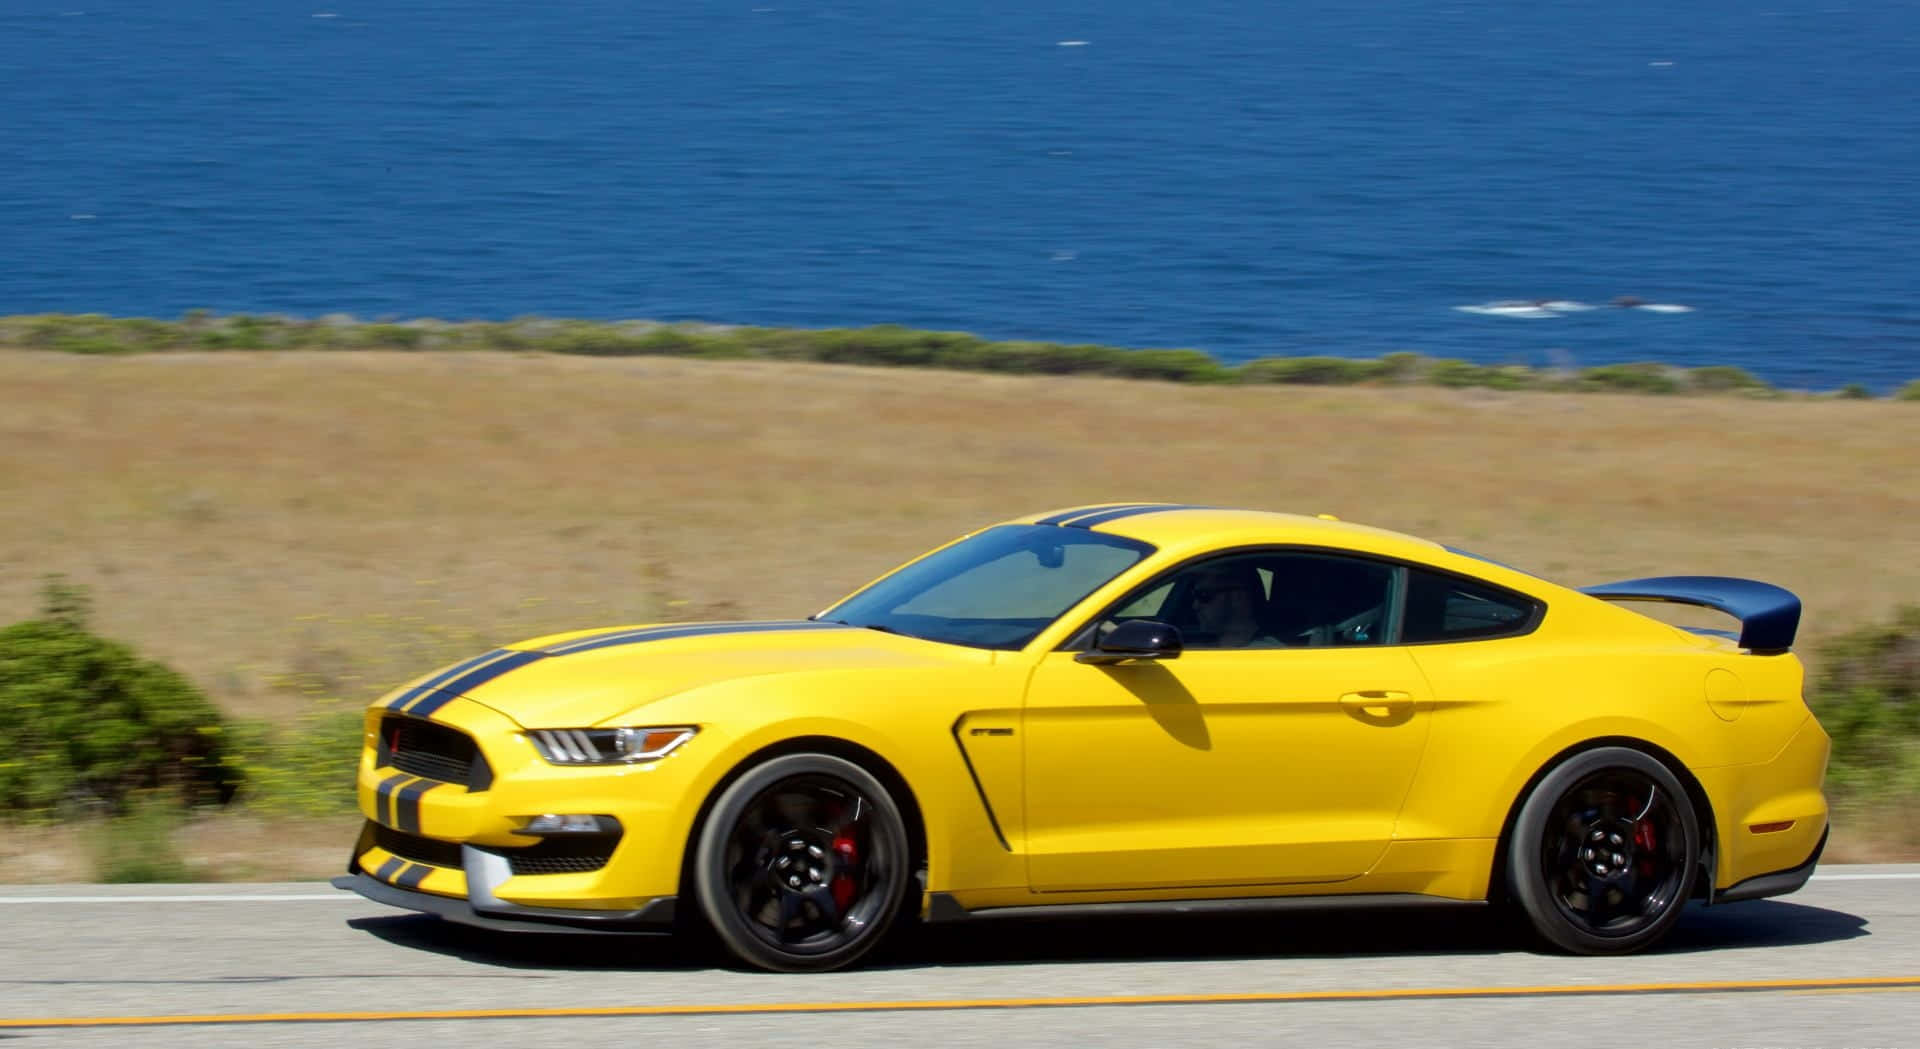 Majestic Ford Mustang Gt350r On Open Road Wallpaper